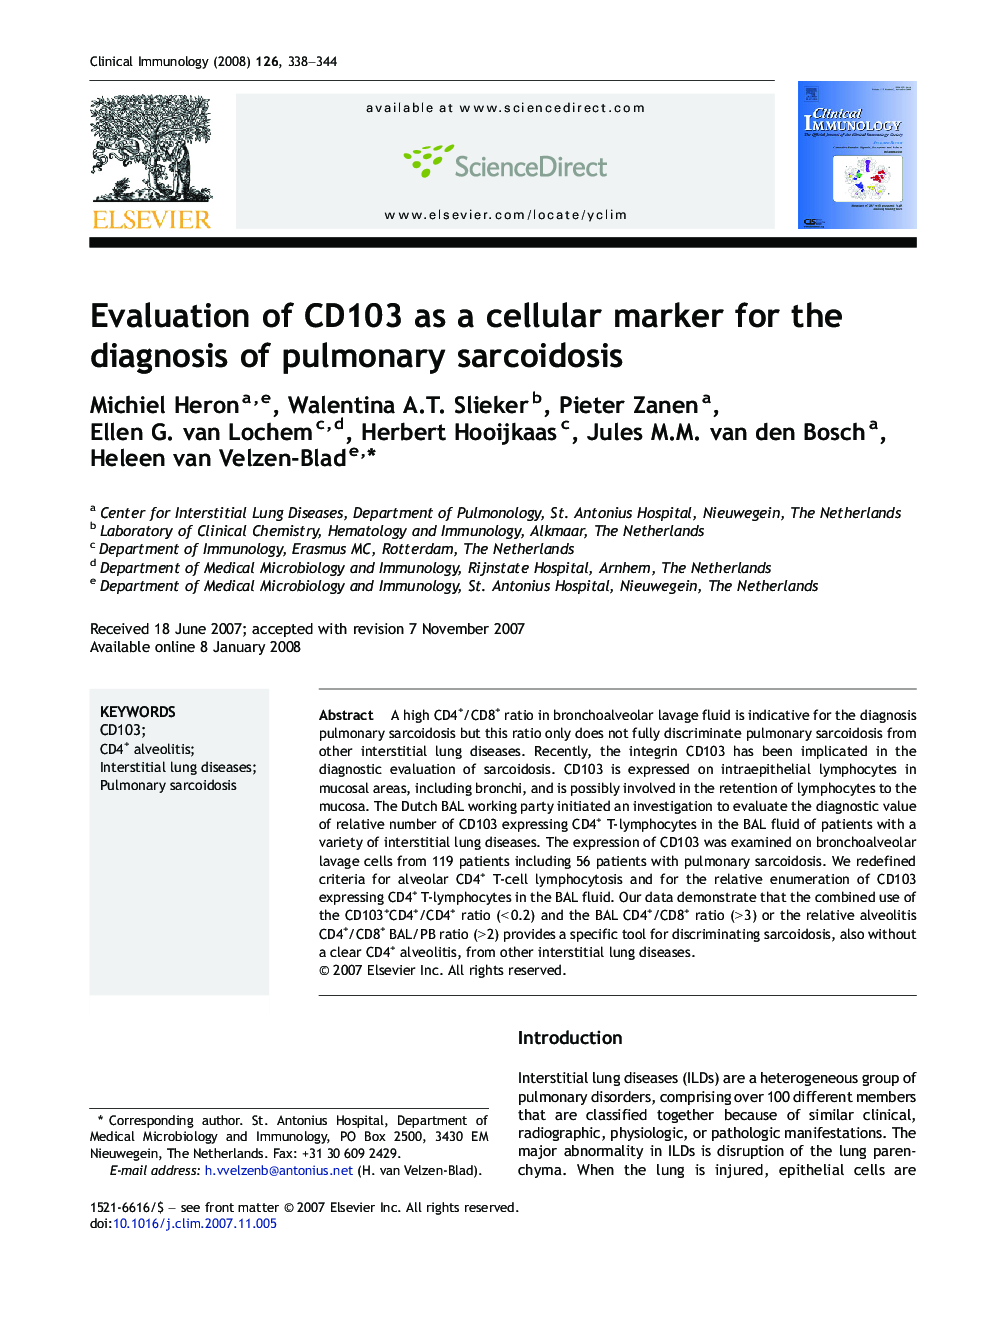 Evaluation of CD103 as a cellular marker for the diagnosis of pulmonary sarcoidosis